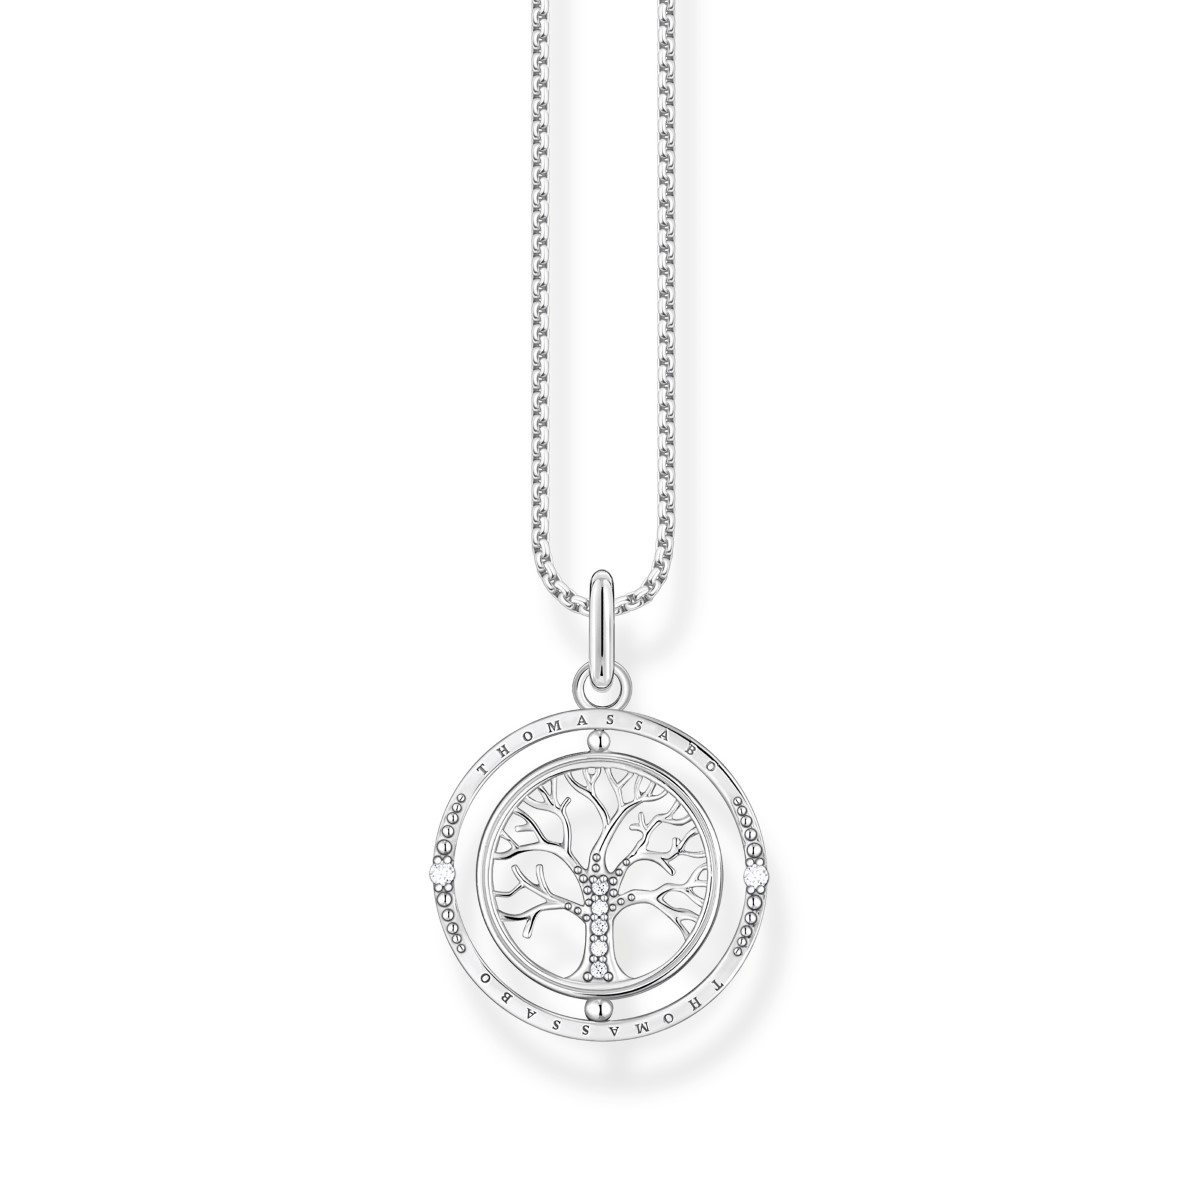 Photos - Pendant / Choker Necklace Thomas Sabo Tree of Love Silver and Zirconia Spinner Necklace 